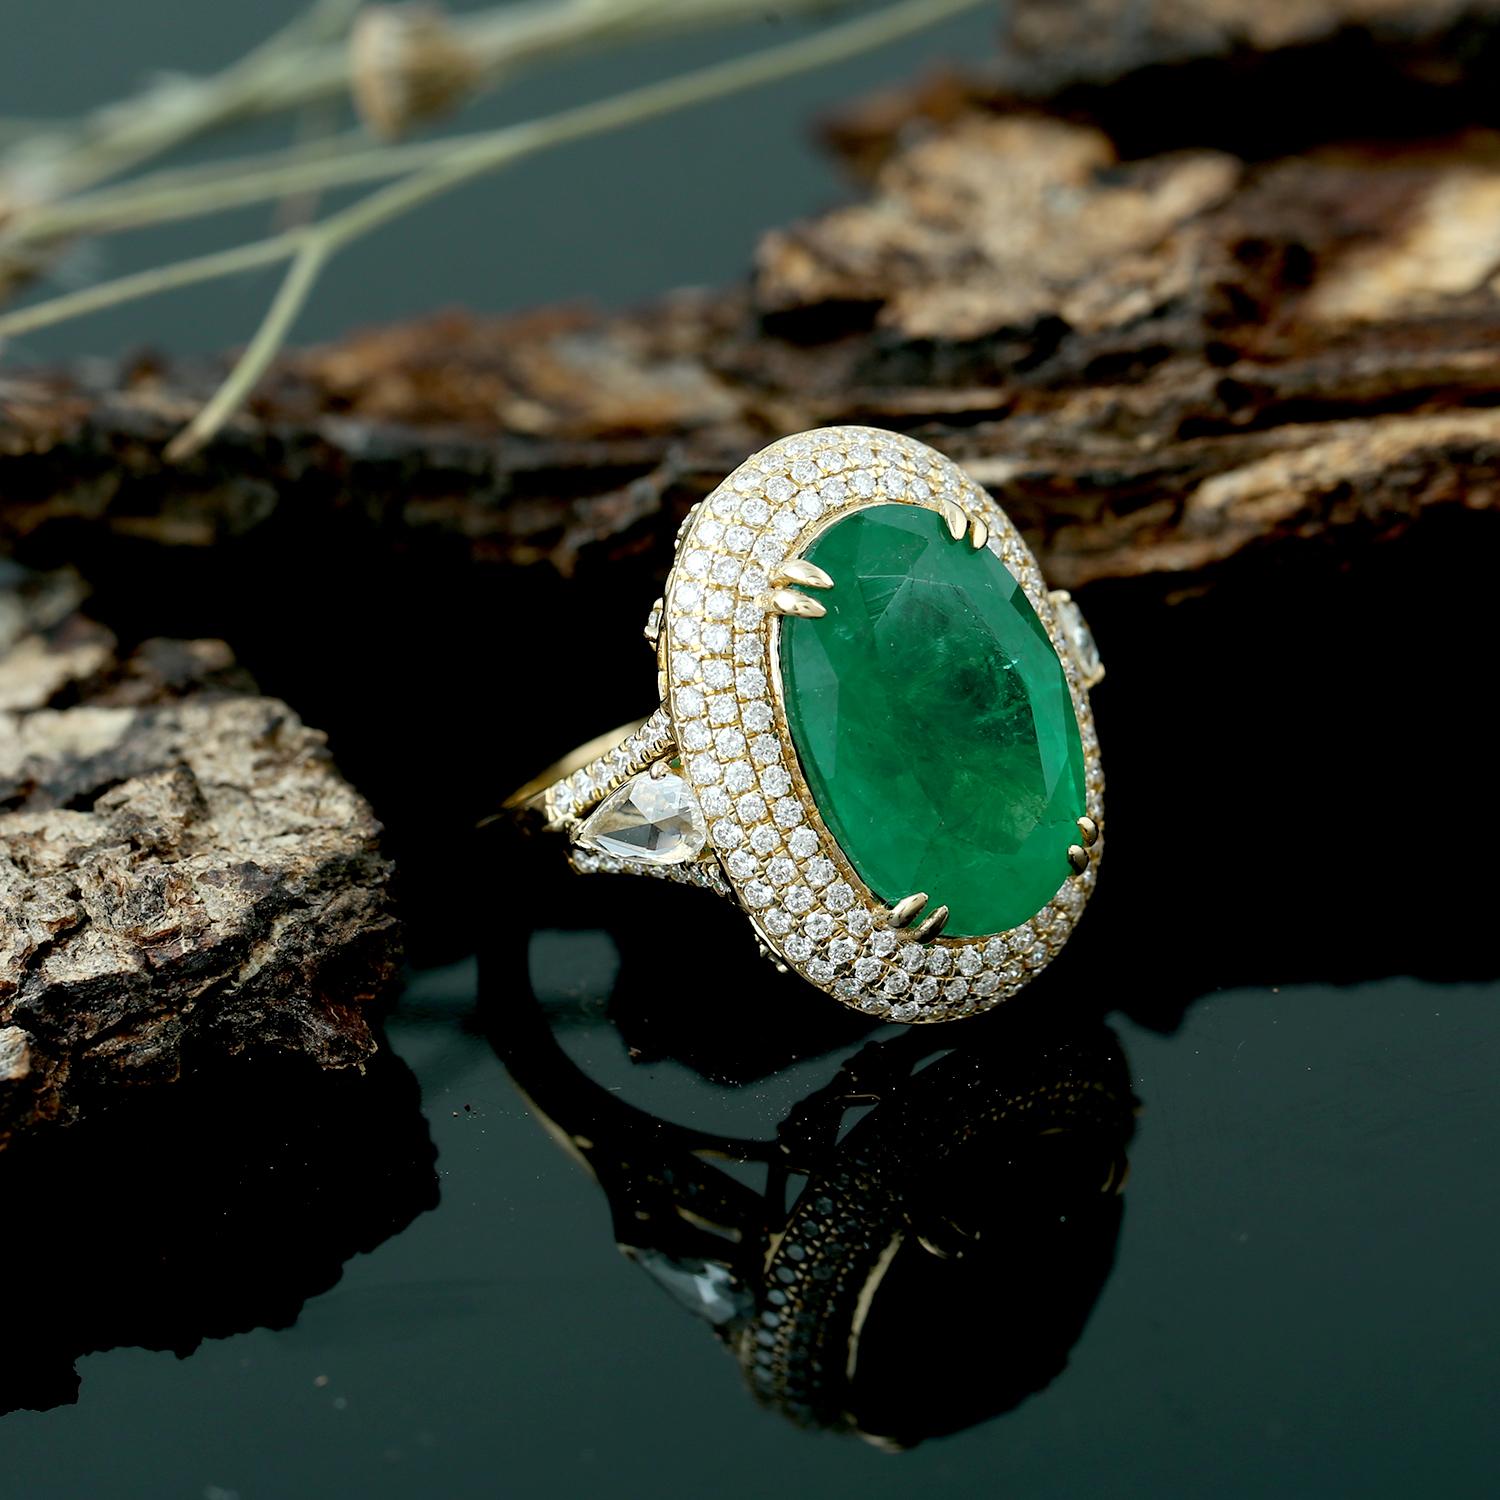 This ring has been meticulously crafted from 14-karat gold.  It is hand set with 9.2 carats emerald & 1.19 carats of sparkling diamonds. 

The ring is a size 7 and may be resized to larger or smaller upon request. 
FOLLOW  MEGHNA JEWELS storefront